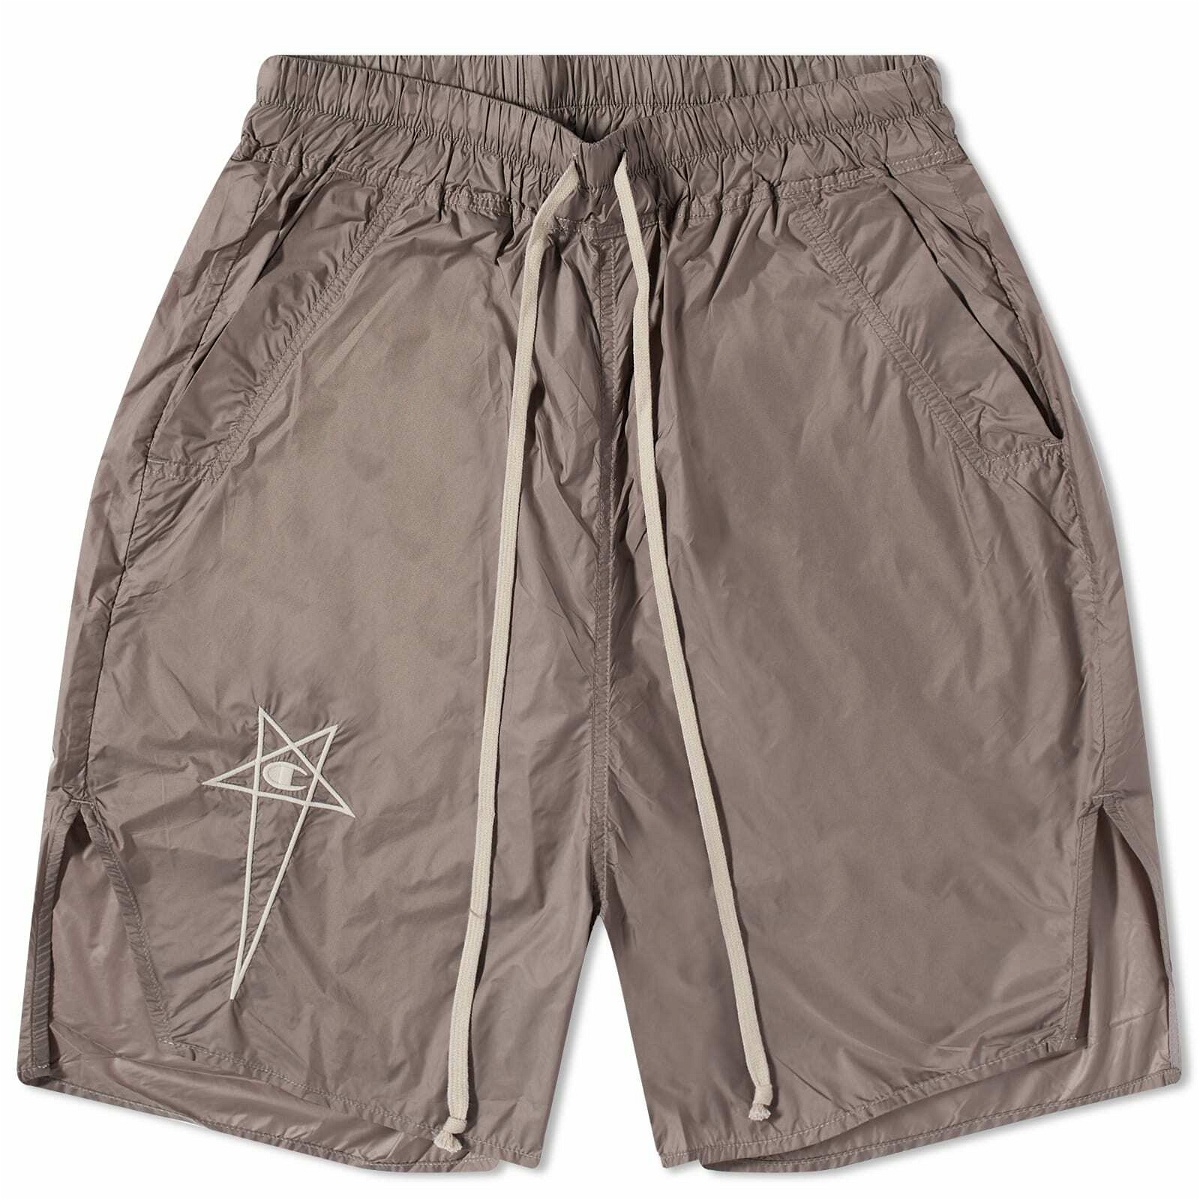 Rick Owens x Champion Beveled Pods Short in Dust Rick Owens